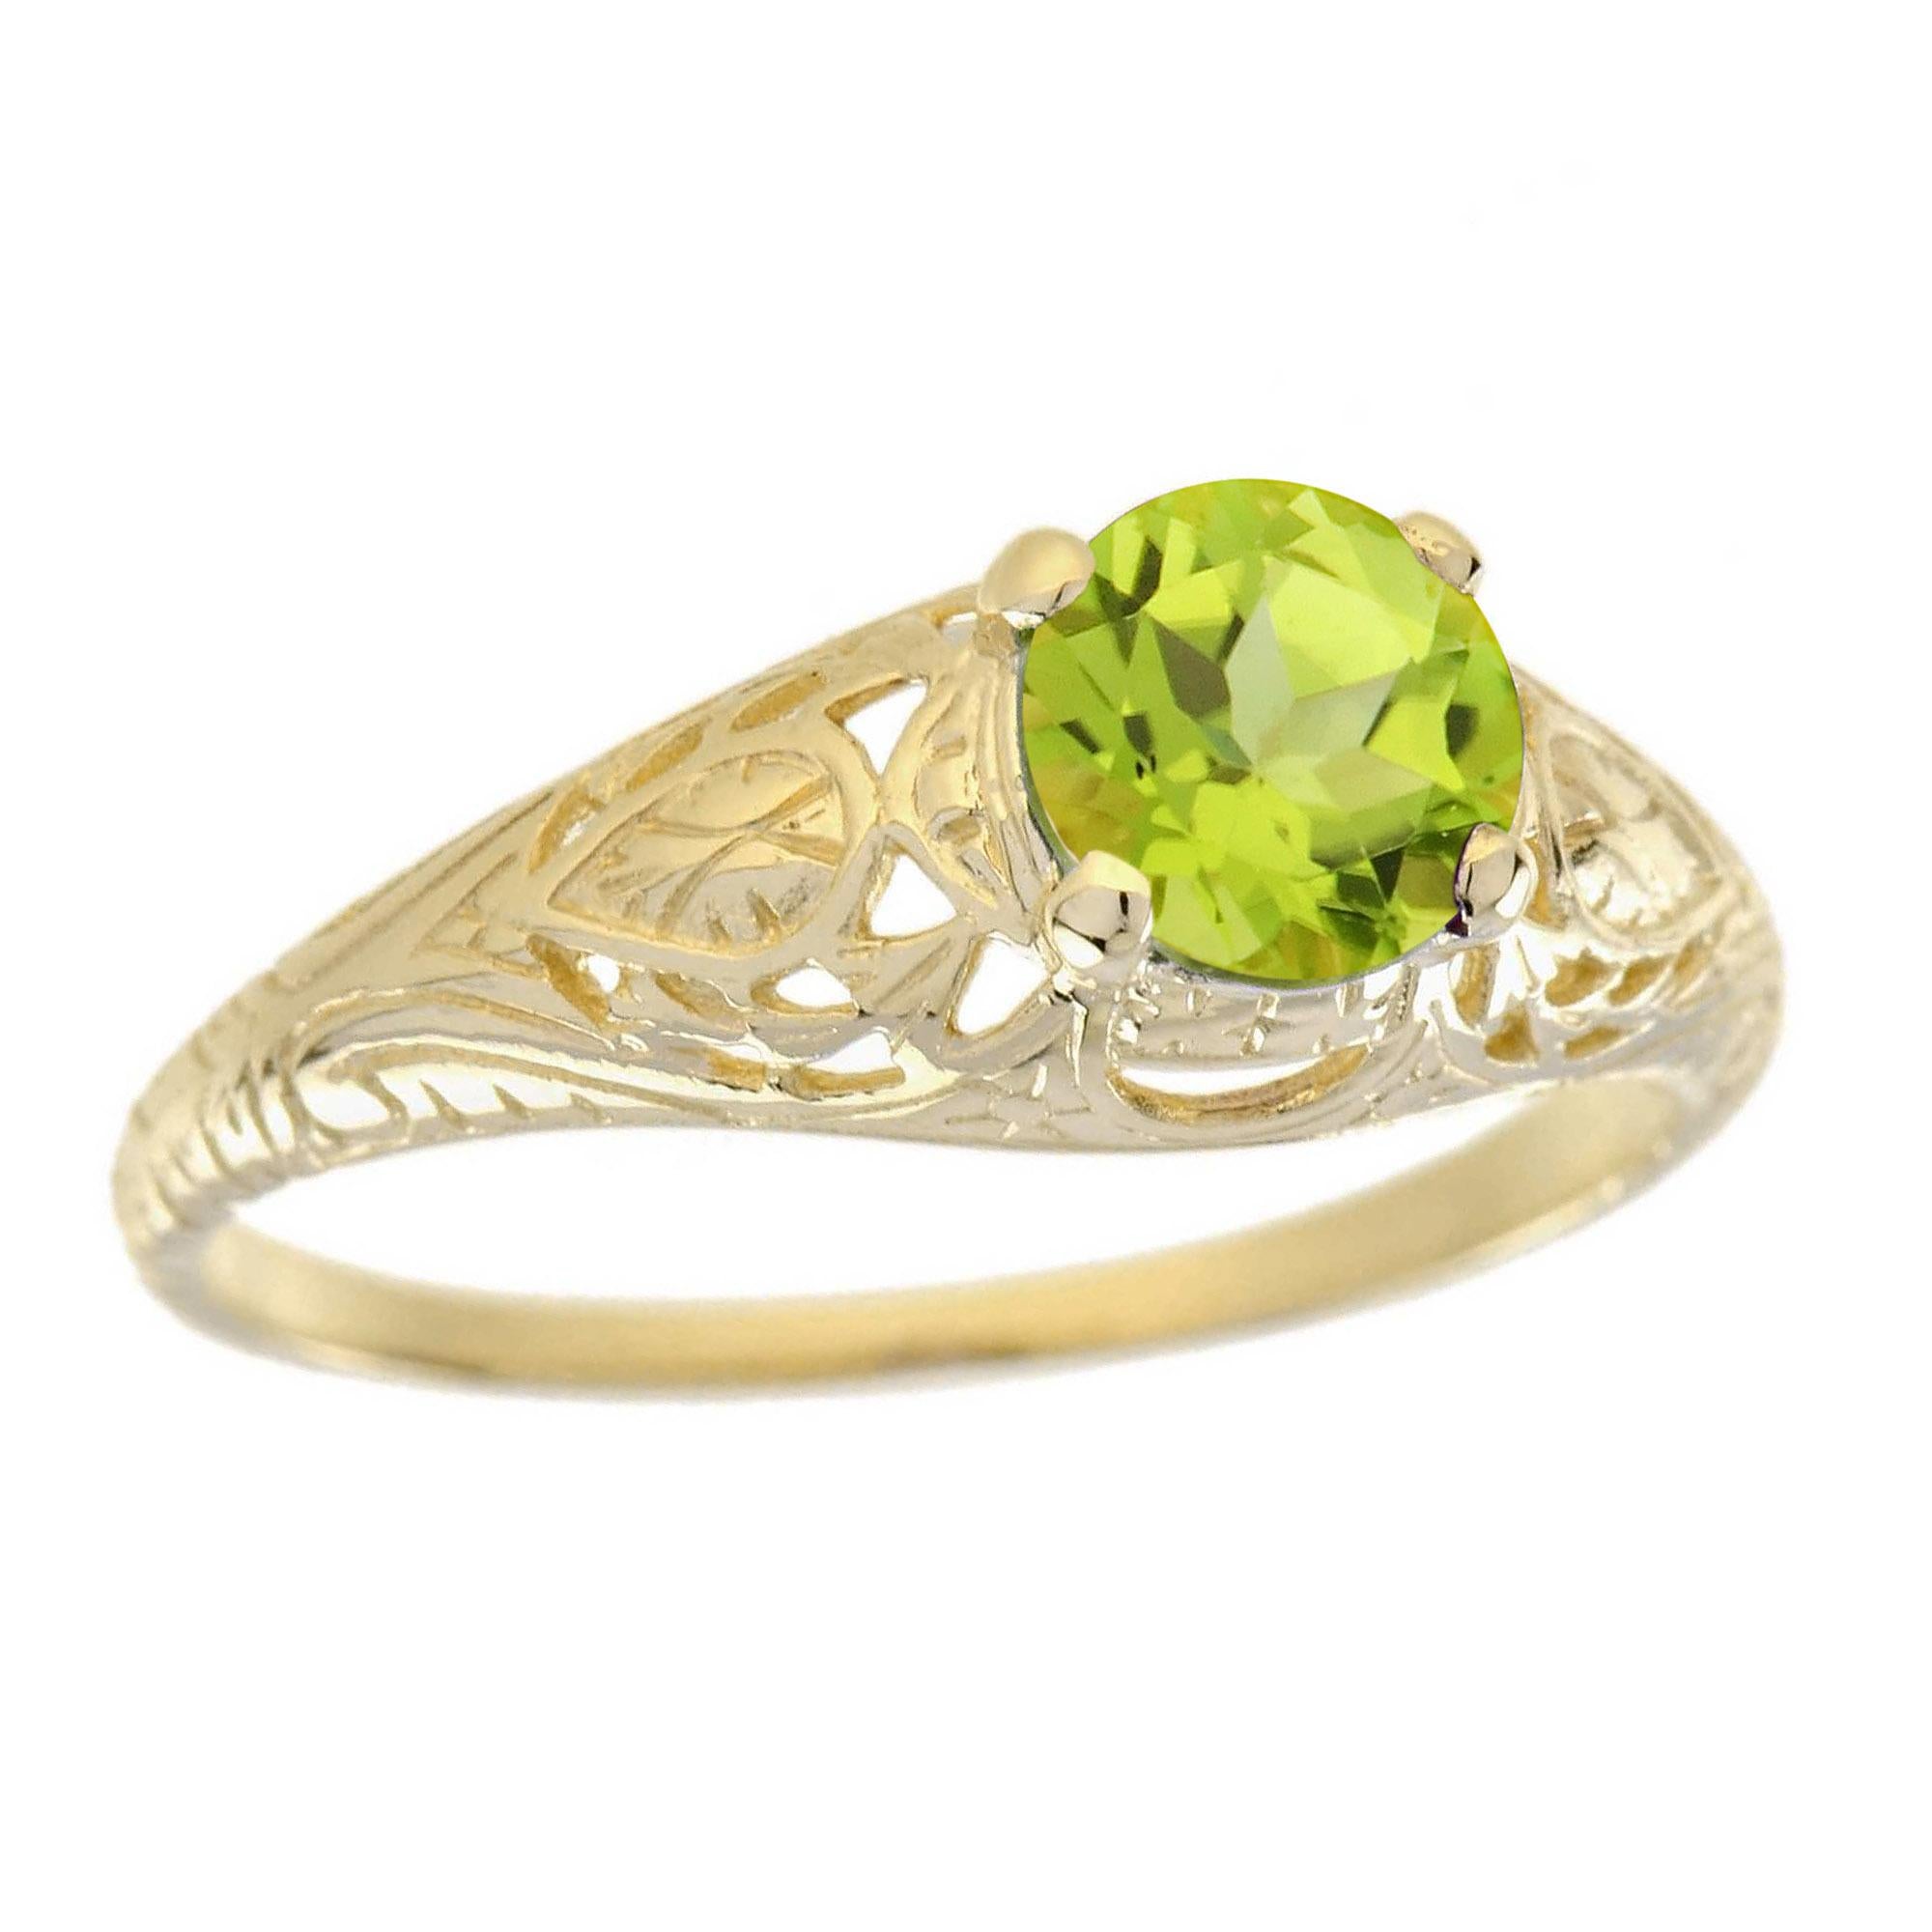 Natural Peridot Vintage Style Carved Solitaire Ring in Solid 9K Yellow Gold